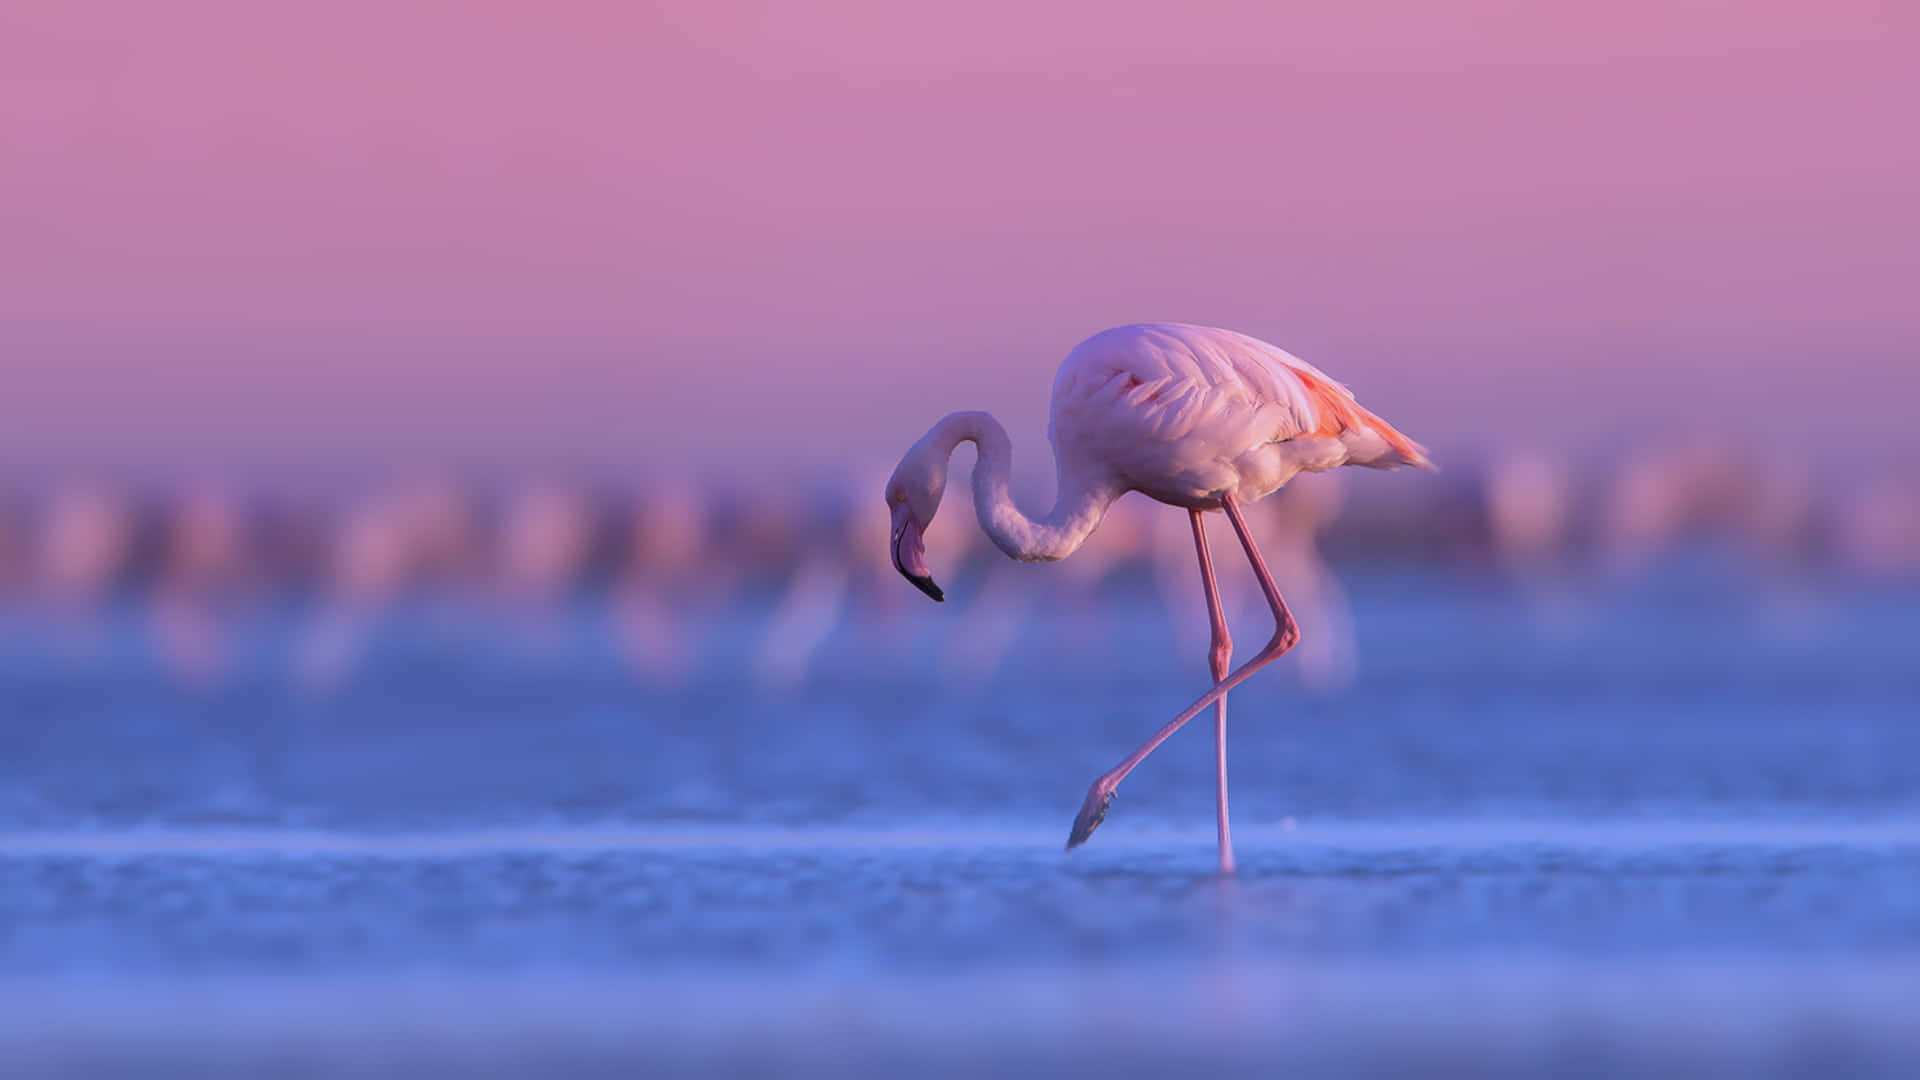 A beautiful pink flamingo against a vibrant dreamy background